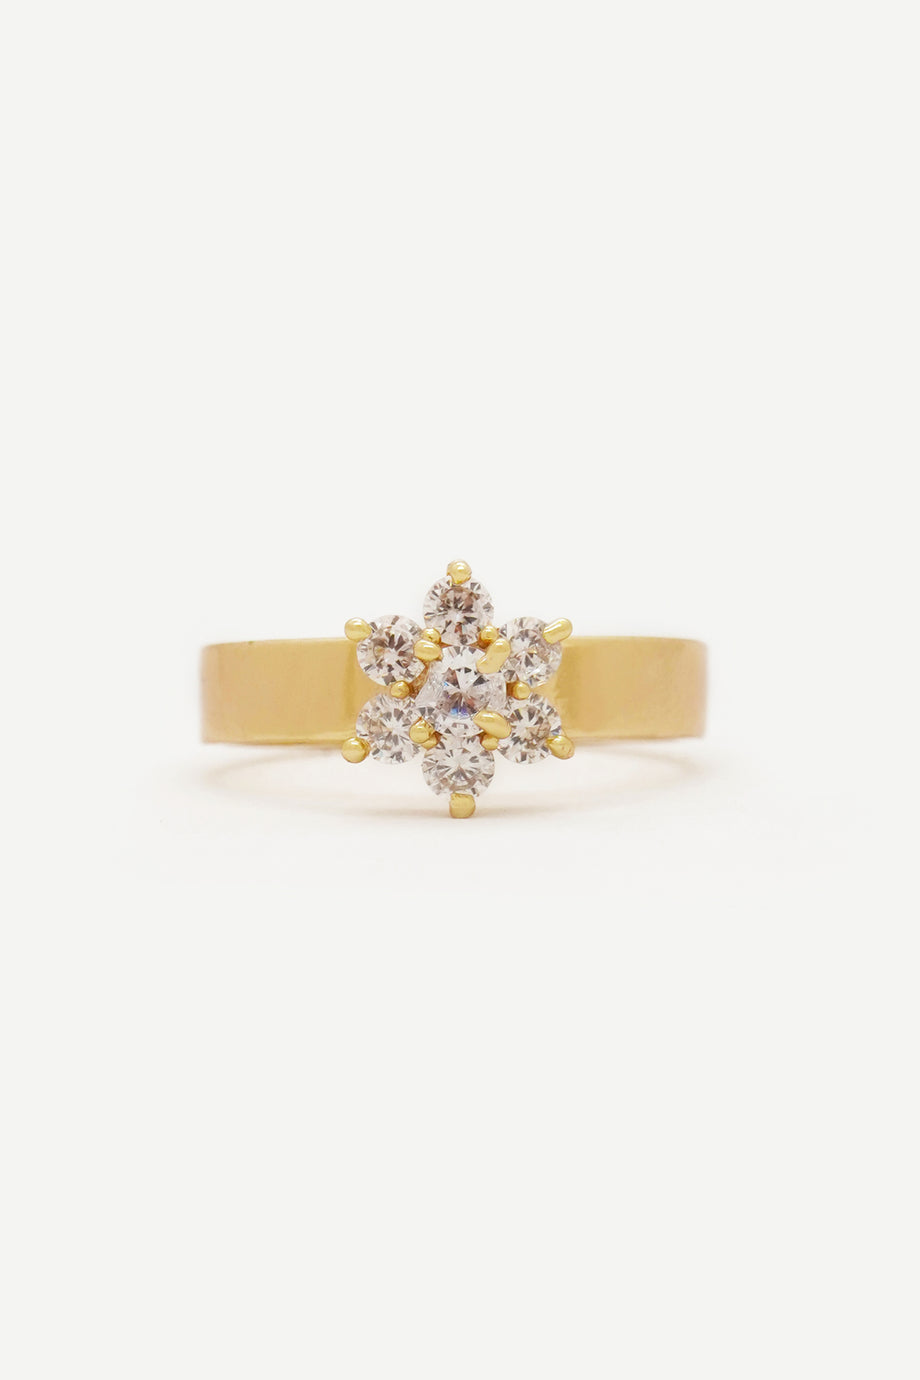 Buy Crunchy Fashion Stylish American Diamond Gold-Plated Floral Finger Ring  for Women online